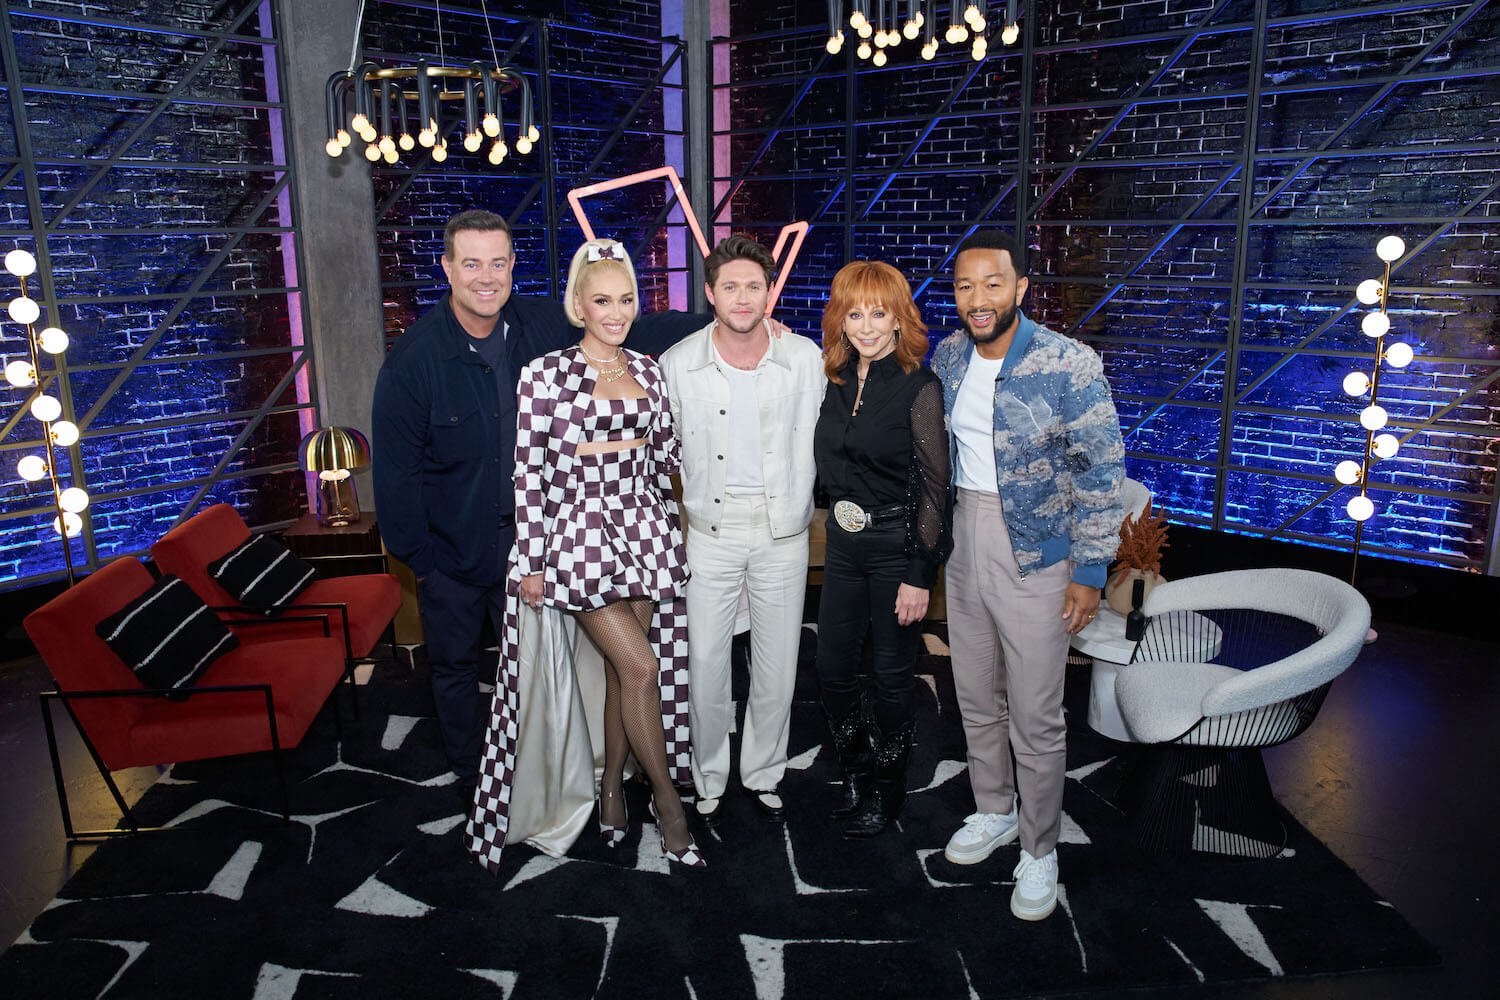 'The Voice' Season 24 coaches Gwen Stefani, Niall Horan, Reba McEntire, John Legend standing together and smiling